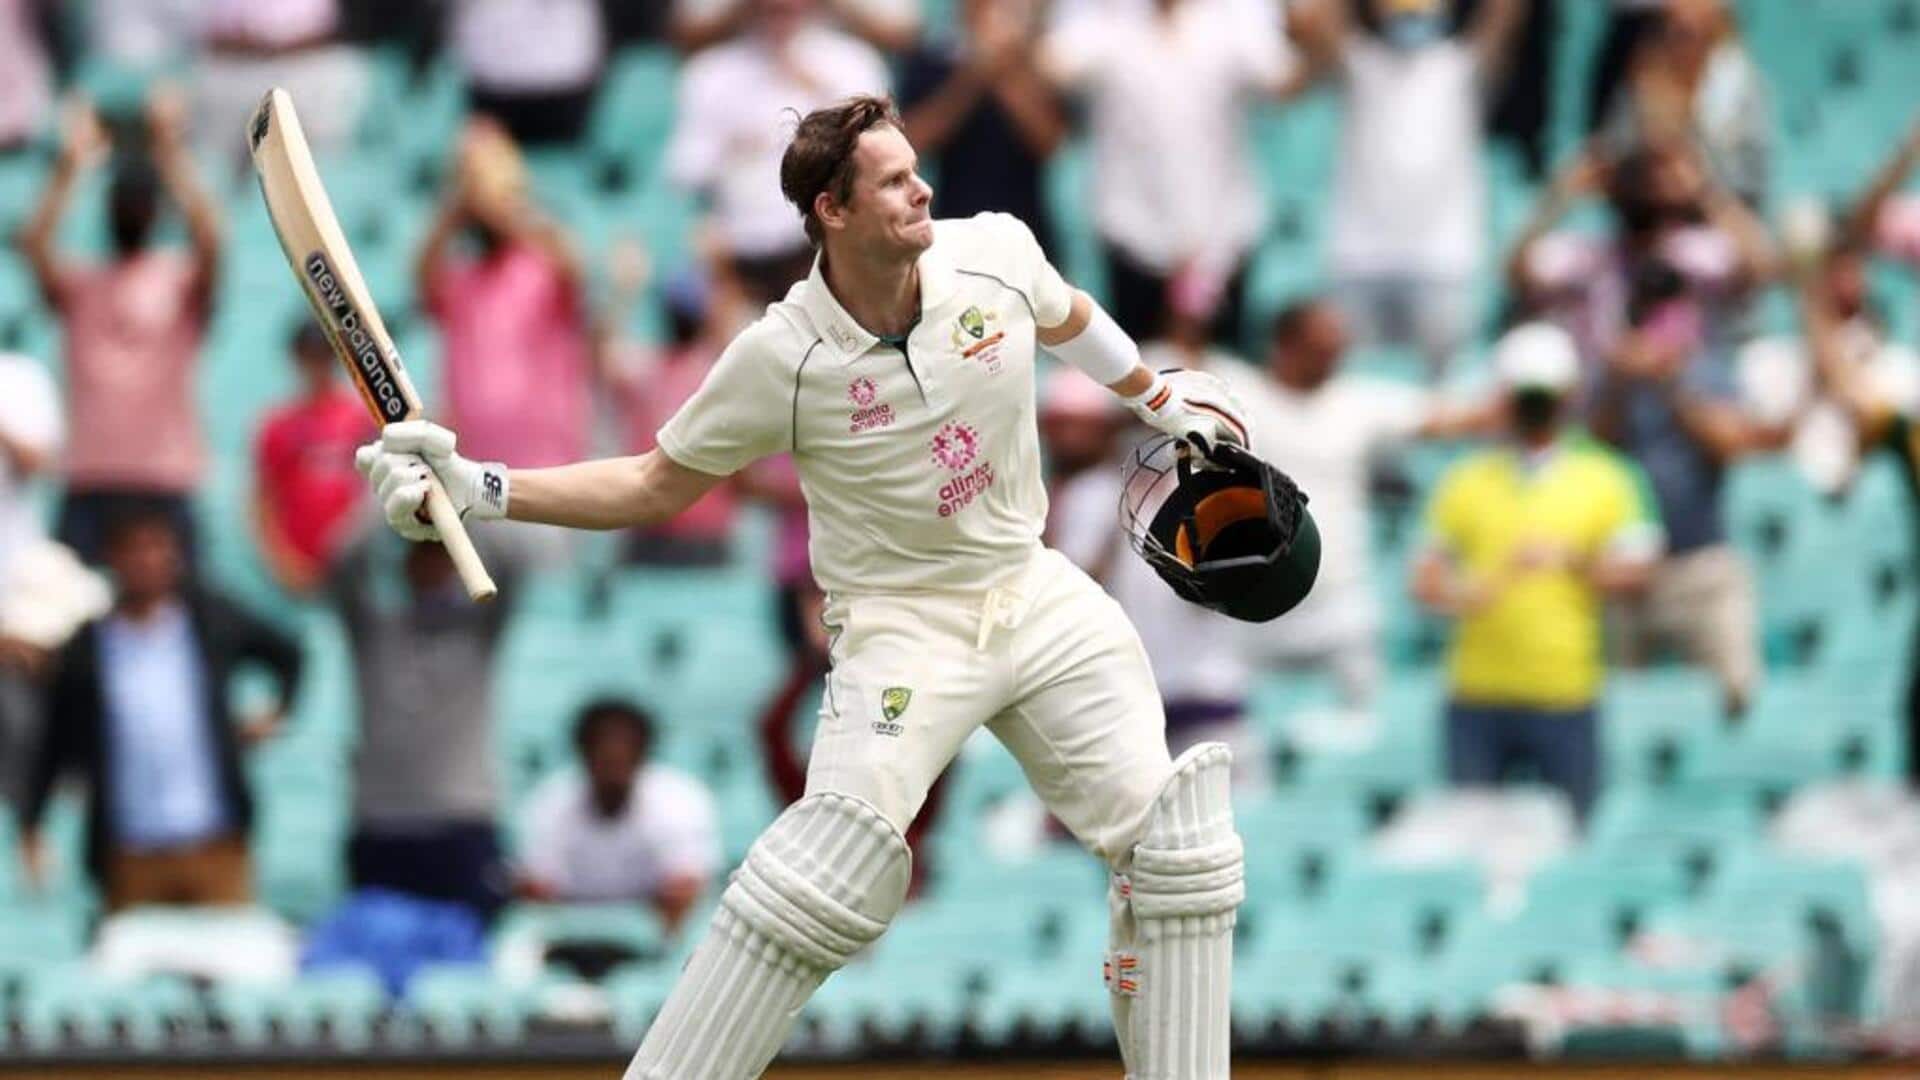 Steve Smith accomplishes 16,000 international runs: Dissecting his numbers